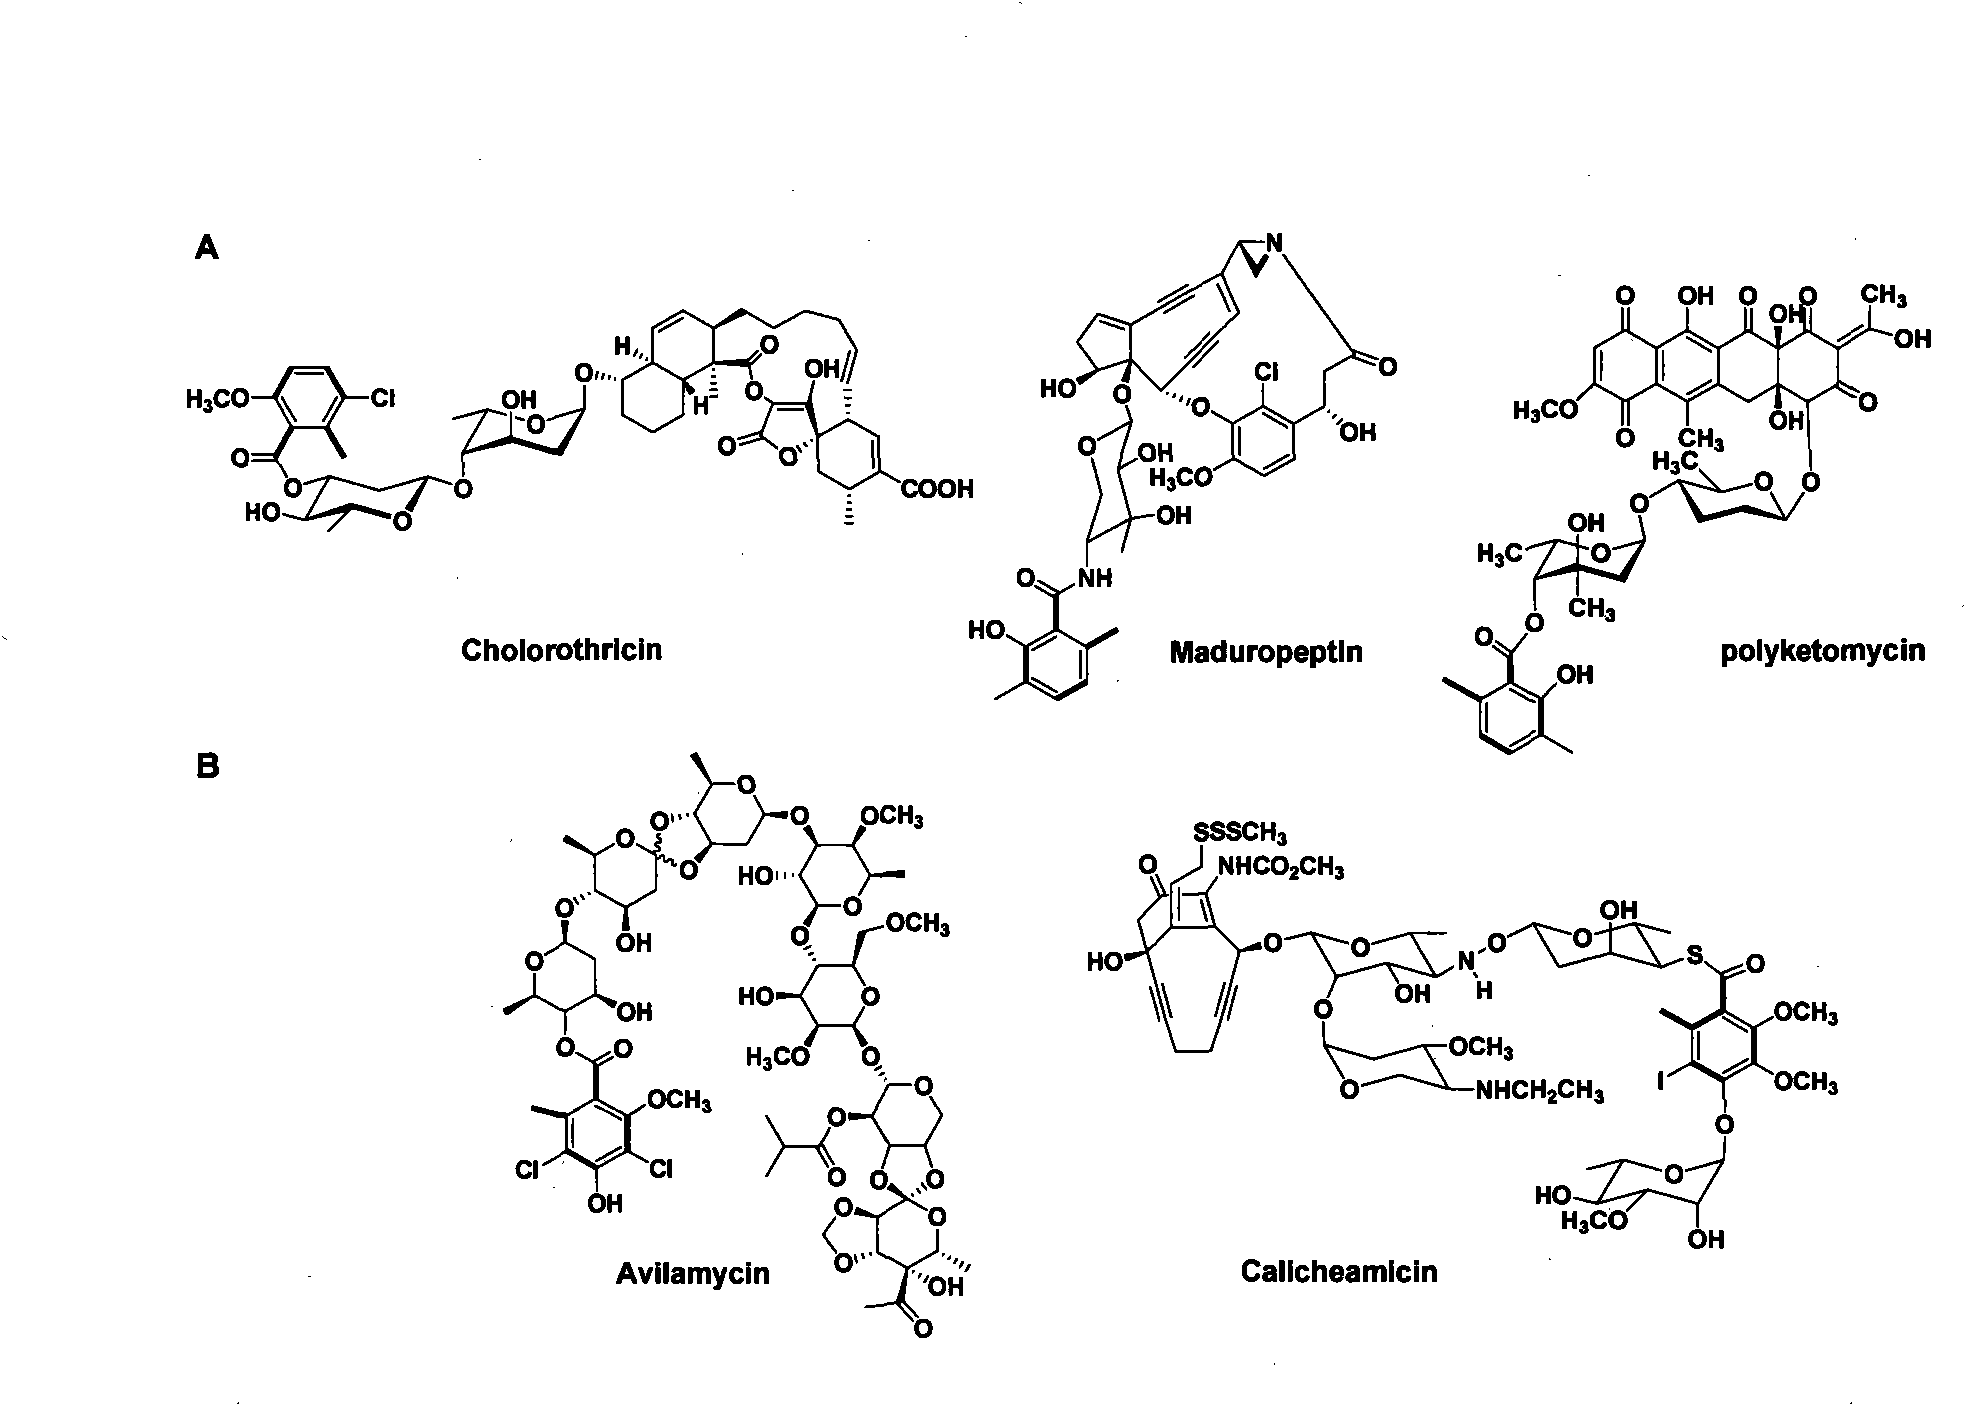 6-methy salicylic acid synthetase transformed by genetic engineering and combinatorial biosynthesis of spirocyclic acetoacetic acid lactone antiboitic